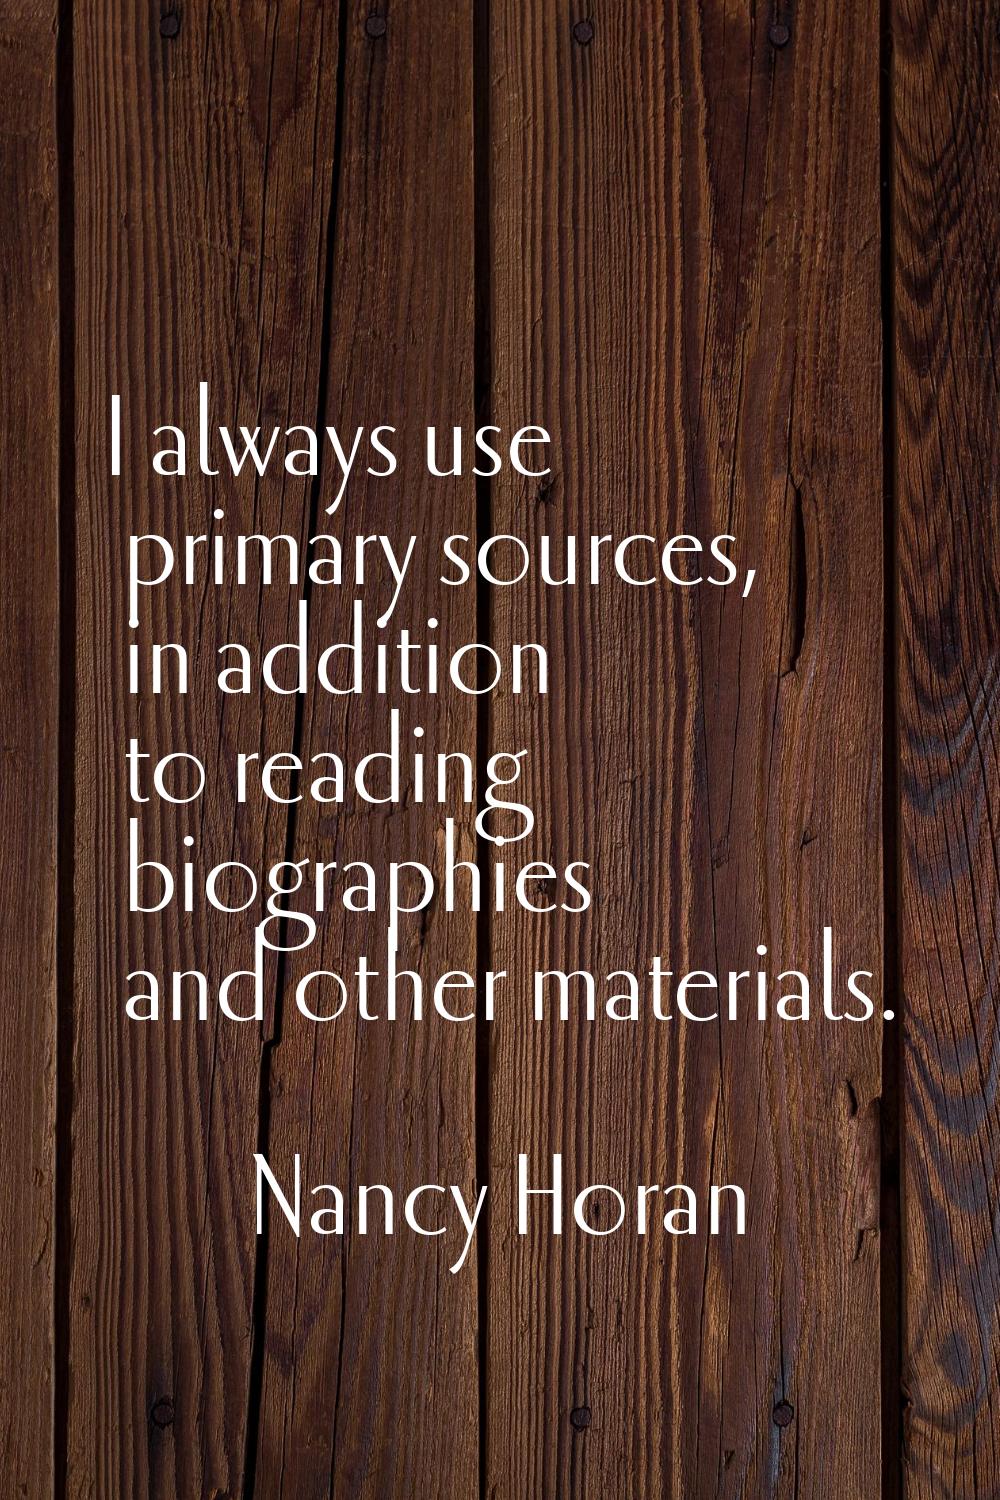 I always use primary sources, in addition to reading biographies and other materials.